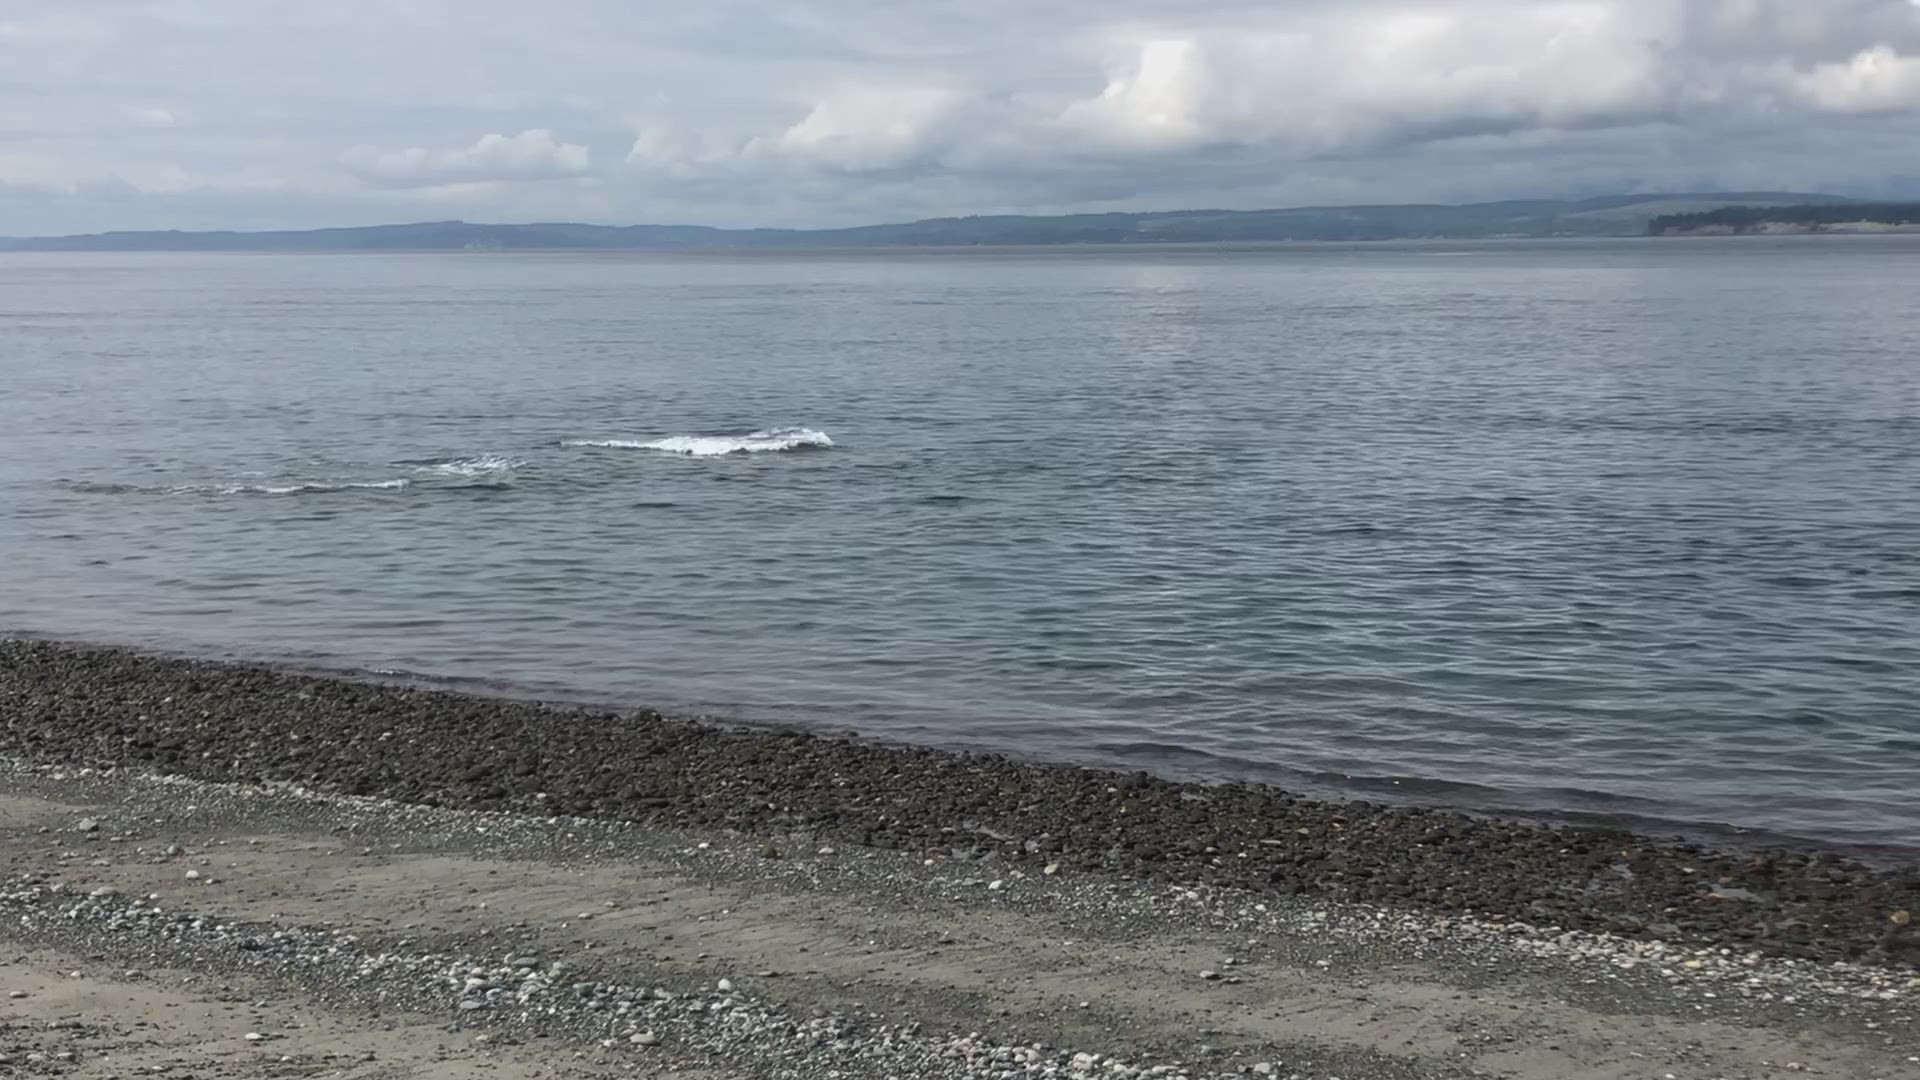 KING 5 viewer Jim Norton sent this video of orcas making a splash on the beaches of Whidbey Island